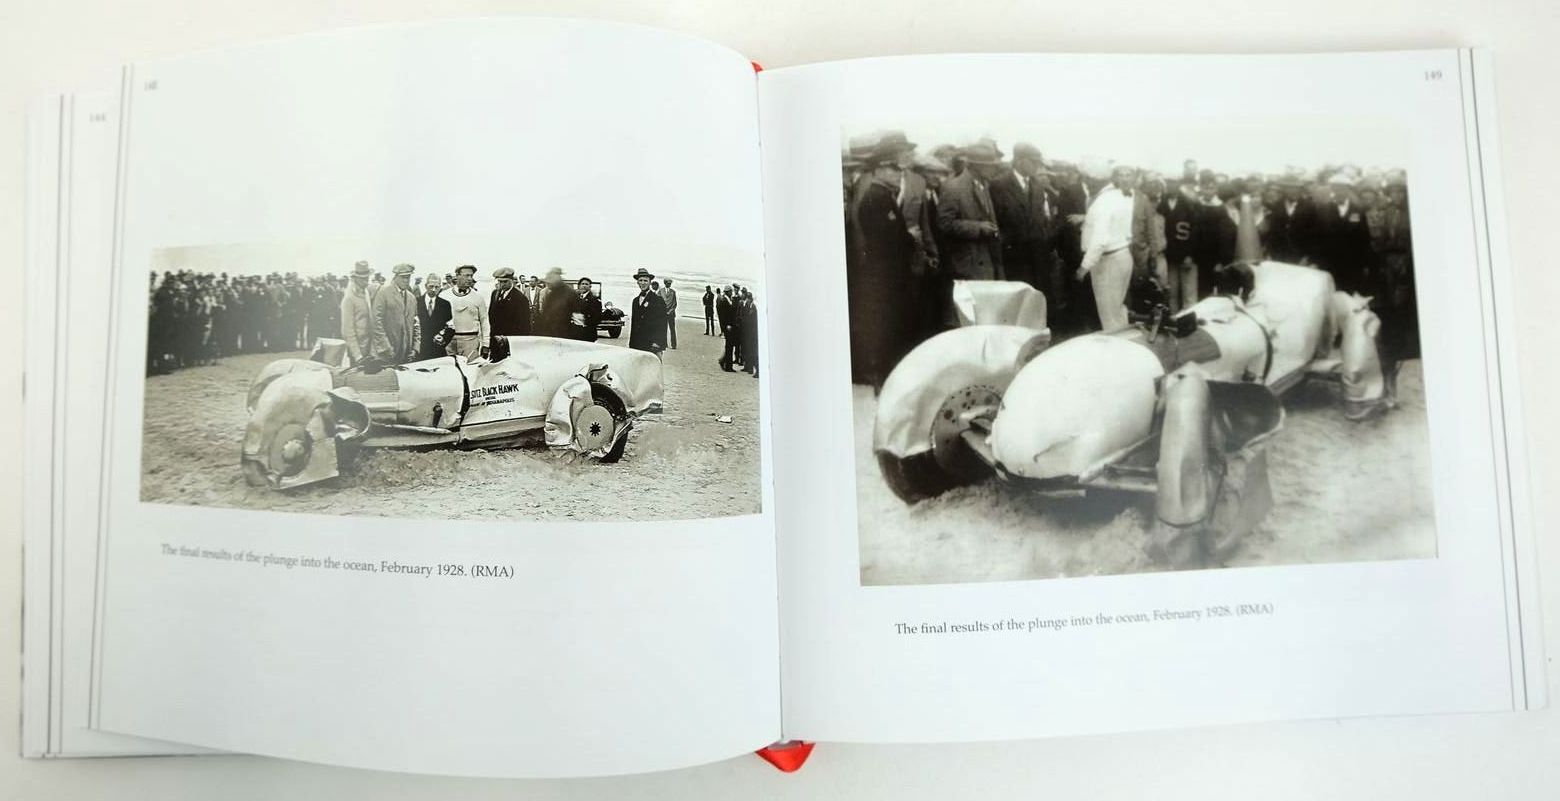 Photo of FRANK LOCKHART AMERICAN SPEED KING written by Morgan-Wu, Sarah
O'Keefe, James published by Racemaker Press (STOCK CODE: 2132778)  for sale by Stella & Rose's Books